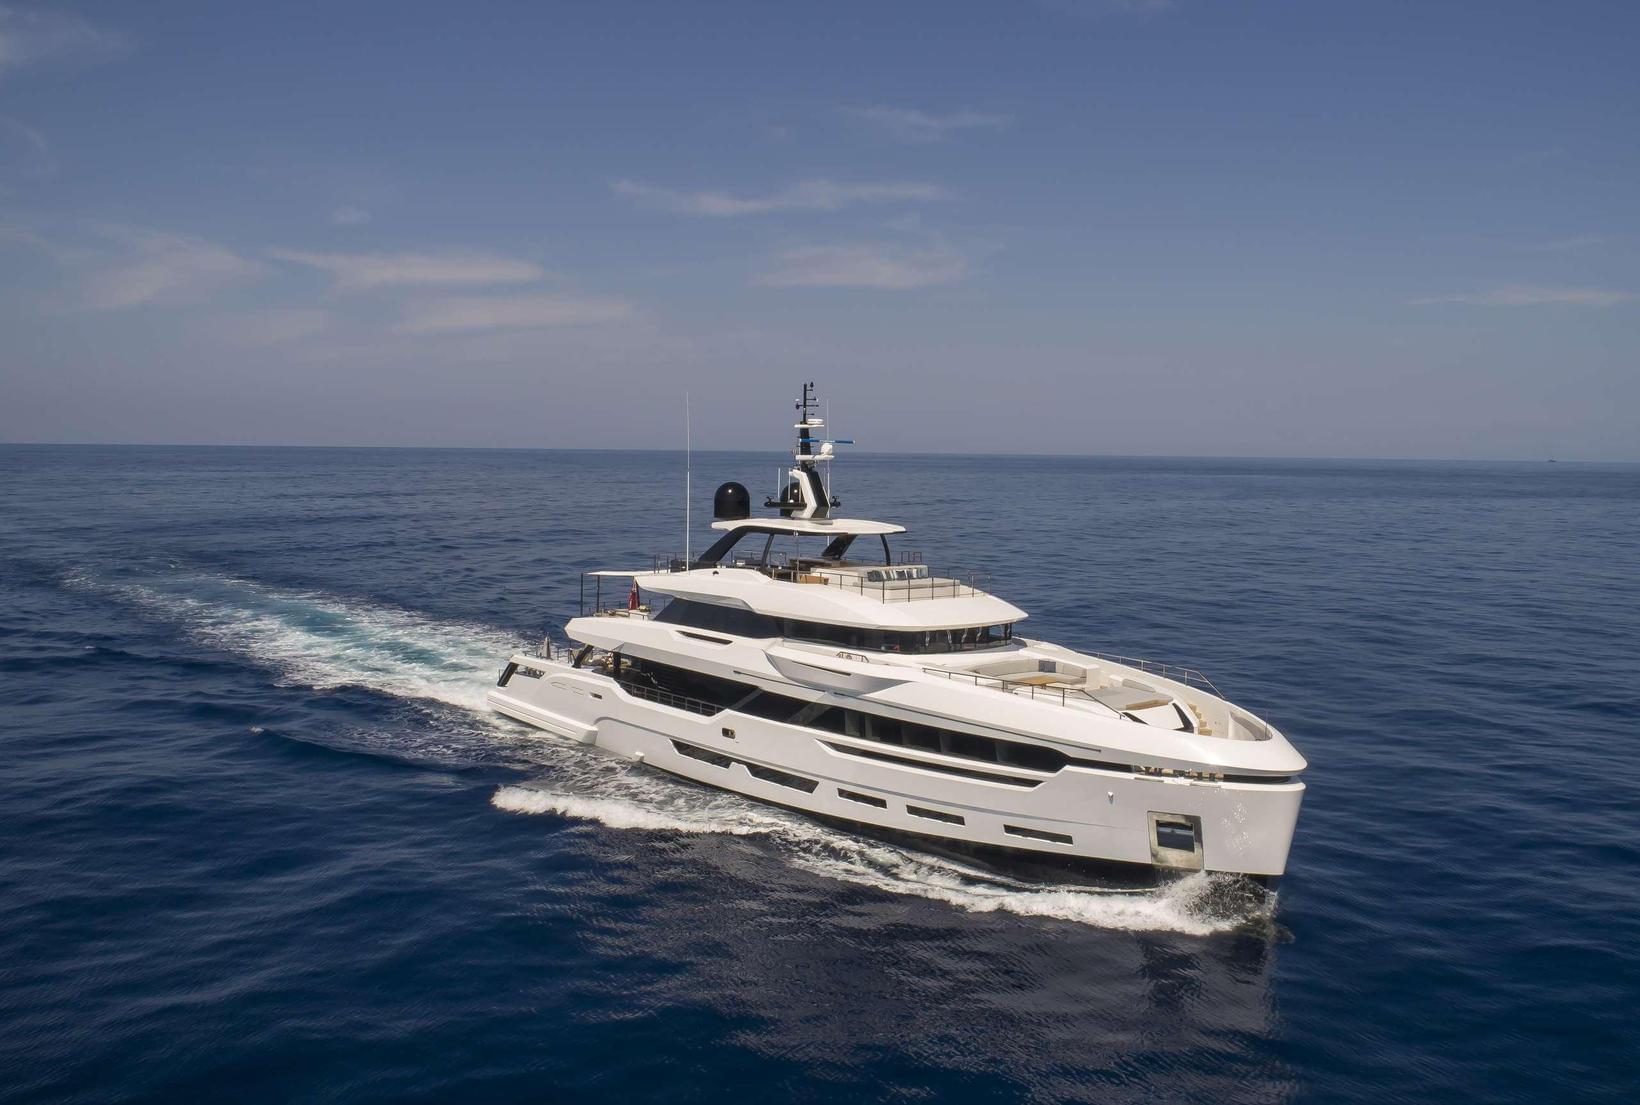 Baglietto proudly announces acquisition of ninth order in the Dom line: sold Dom133 hull no. 10256